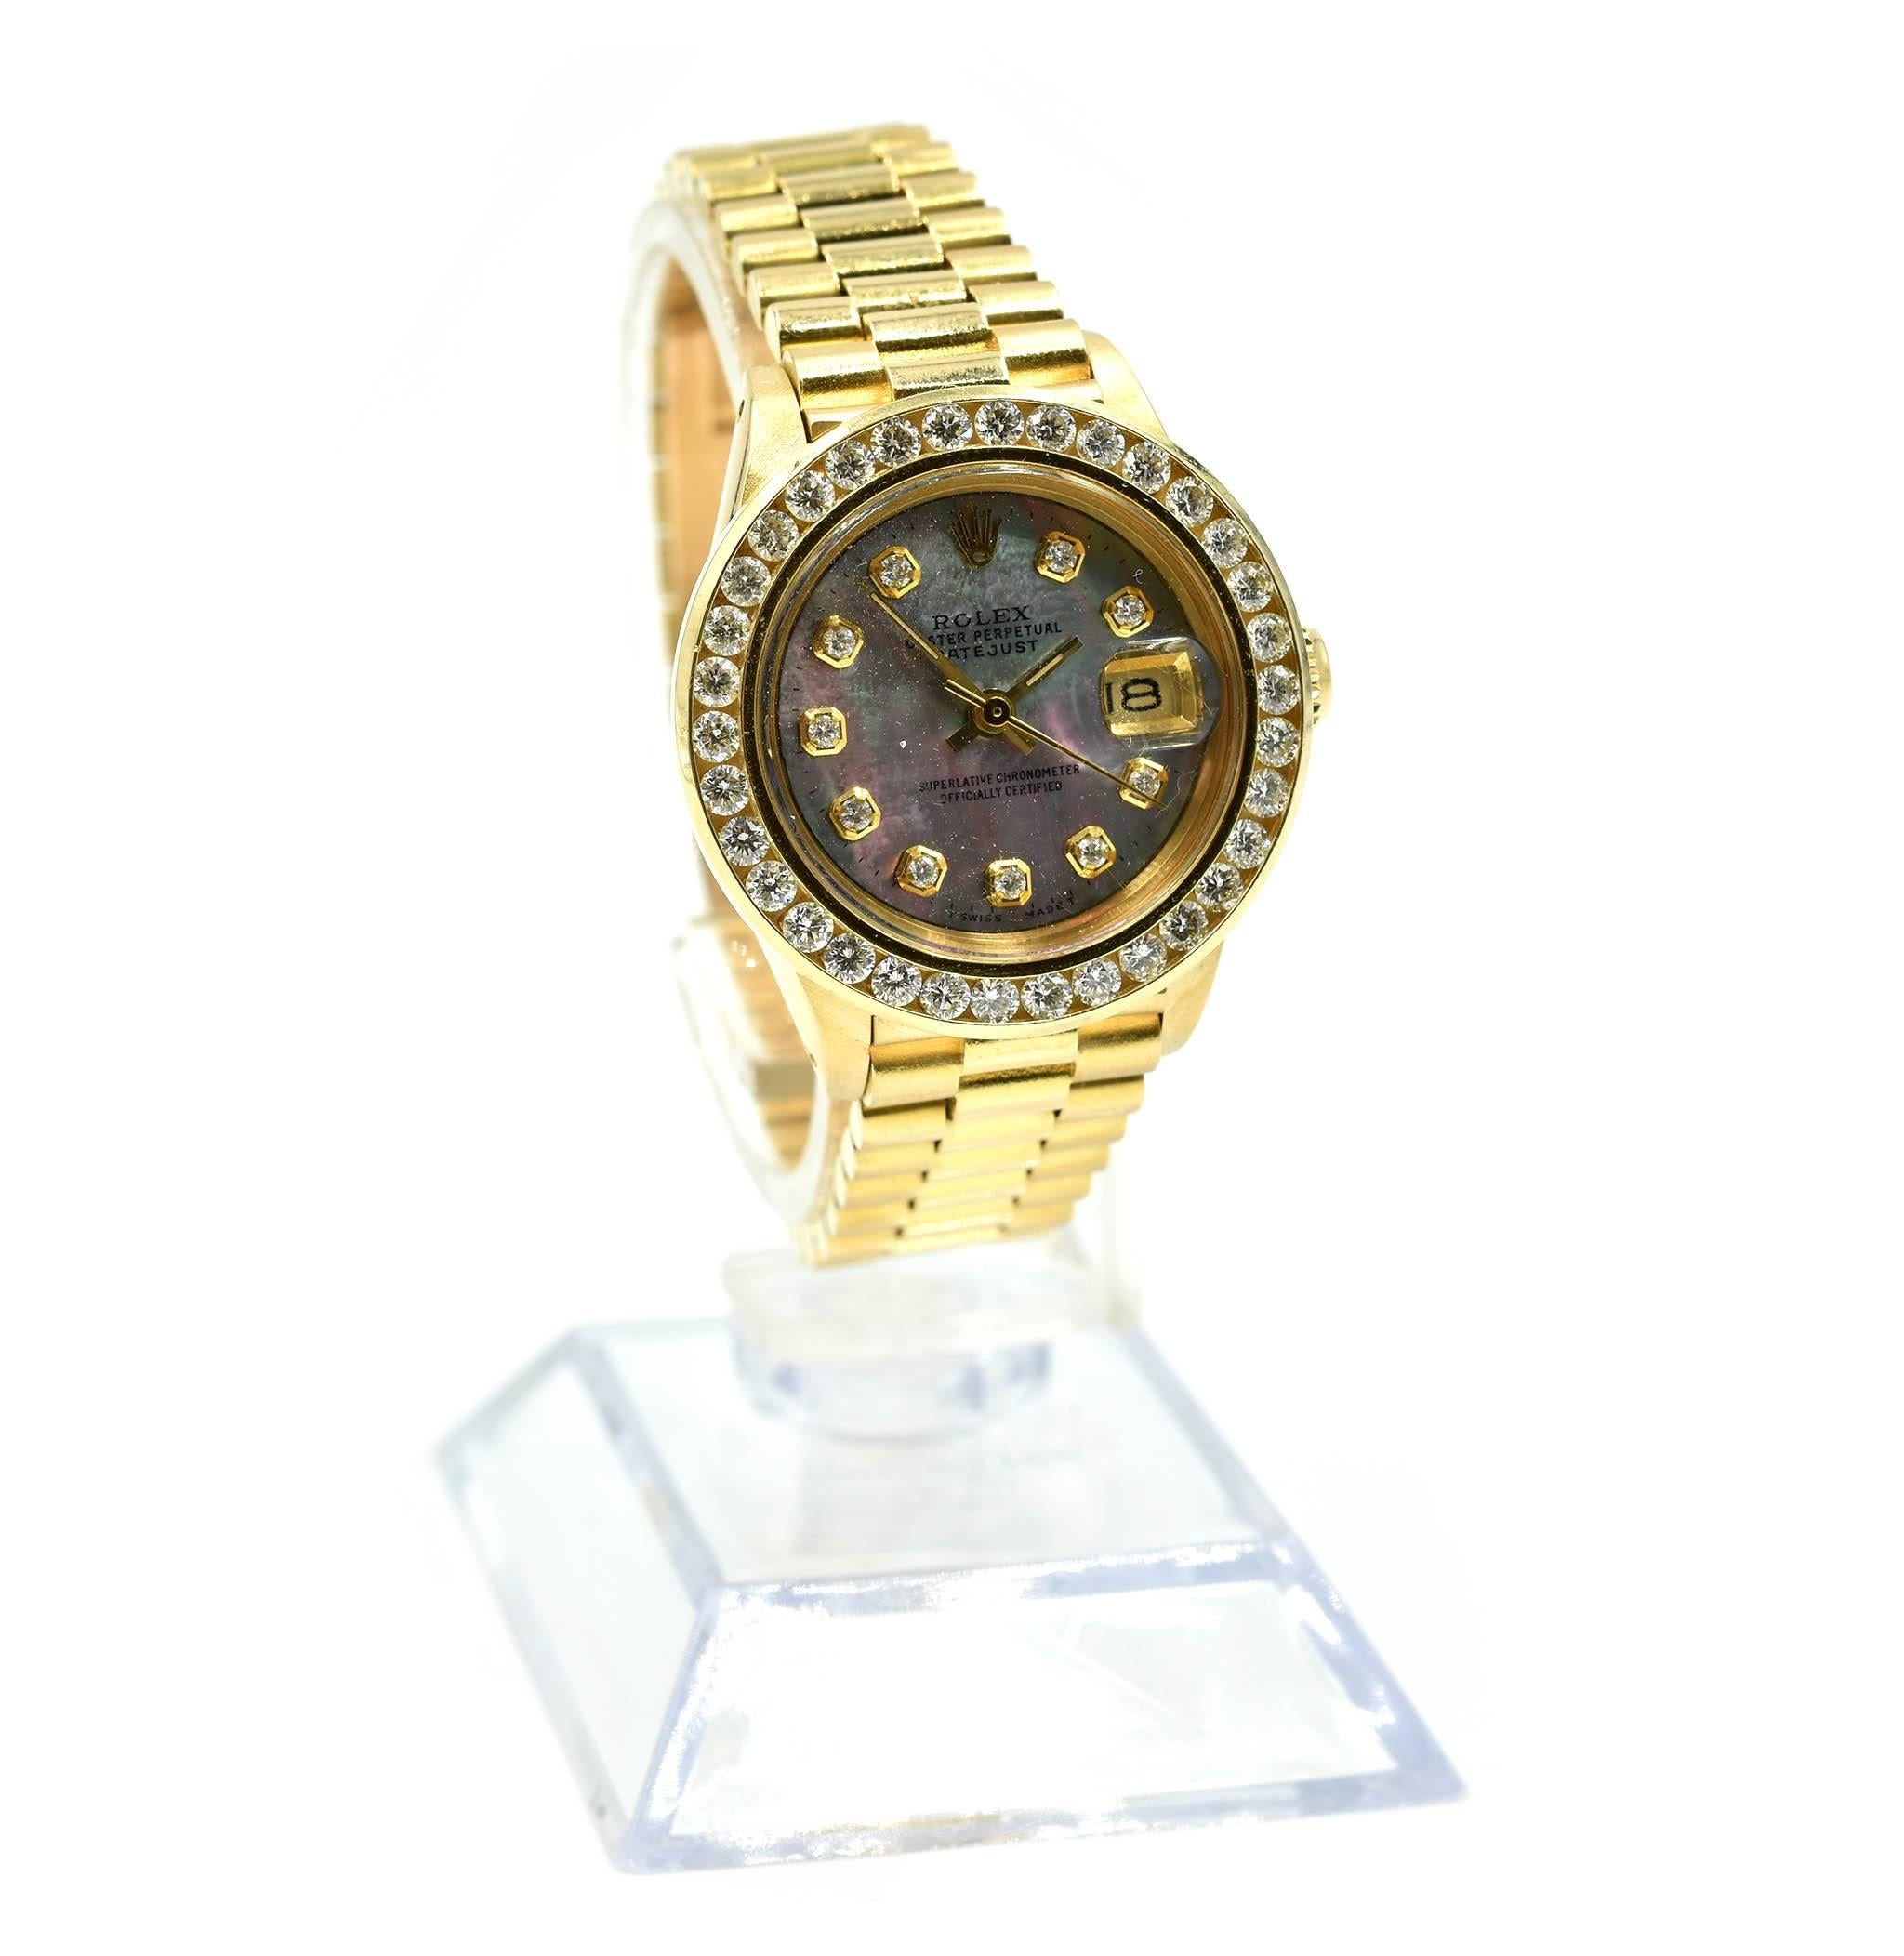 Movement: automatic
Function: hours, minutes, seconds, date
Case: round 26mm 18k yellow gold case with factory diamond bezel, screw-down crown, sapphire protective crystal, water resistant to 30 meters
Band: 18k yellow gold presidential bracelet